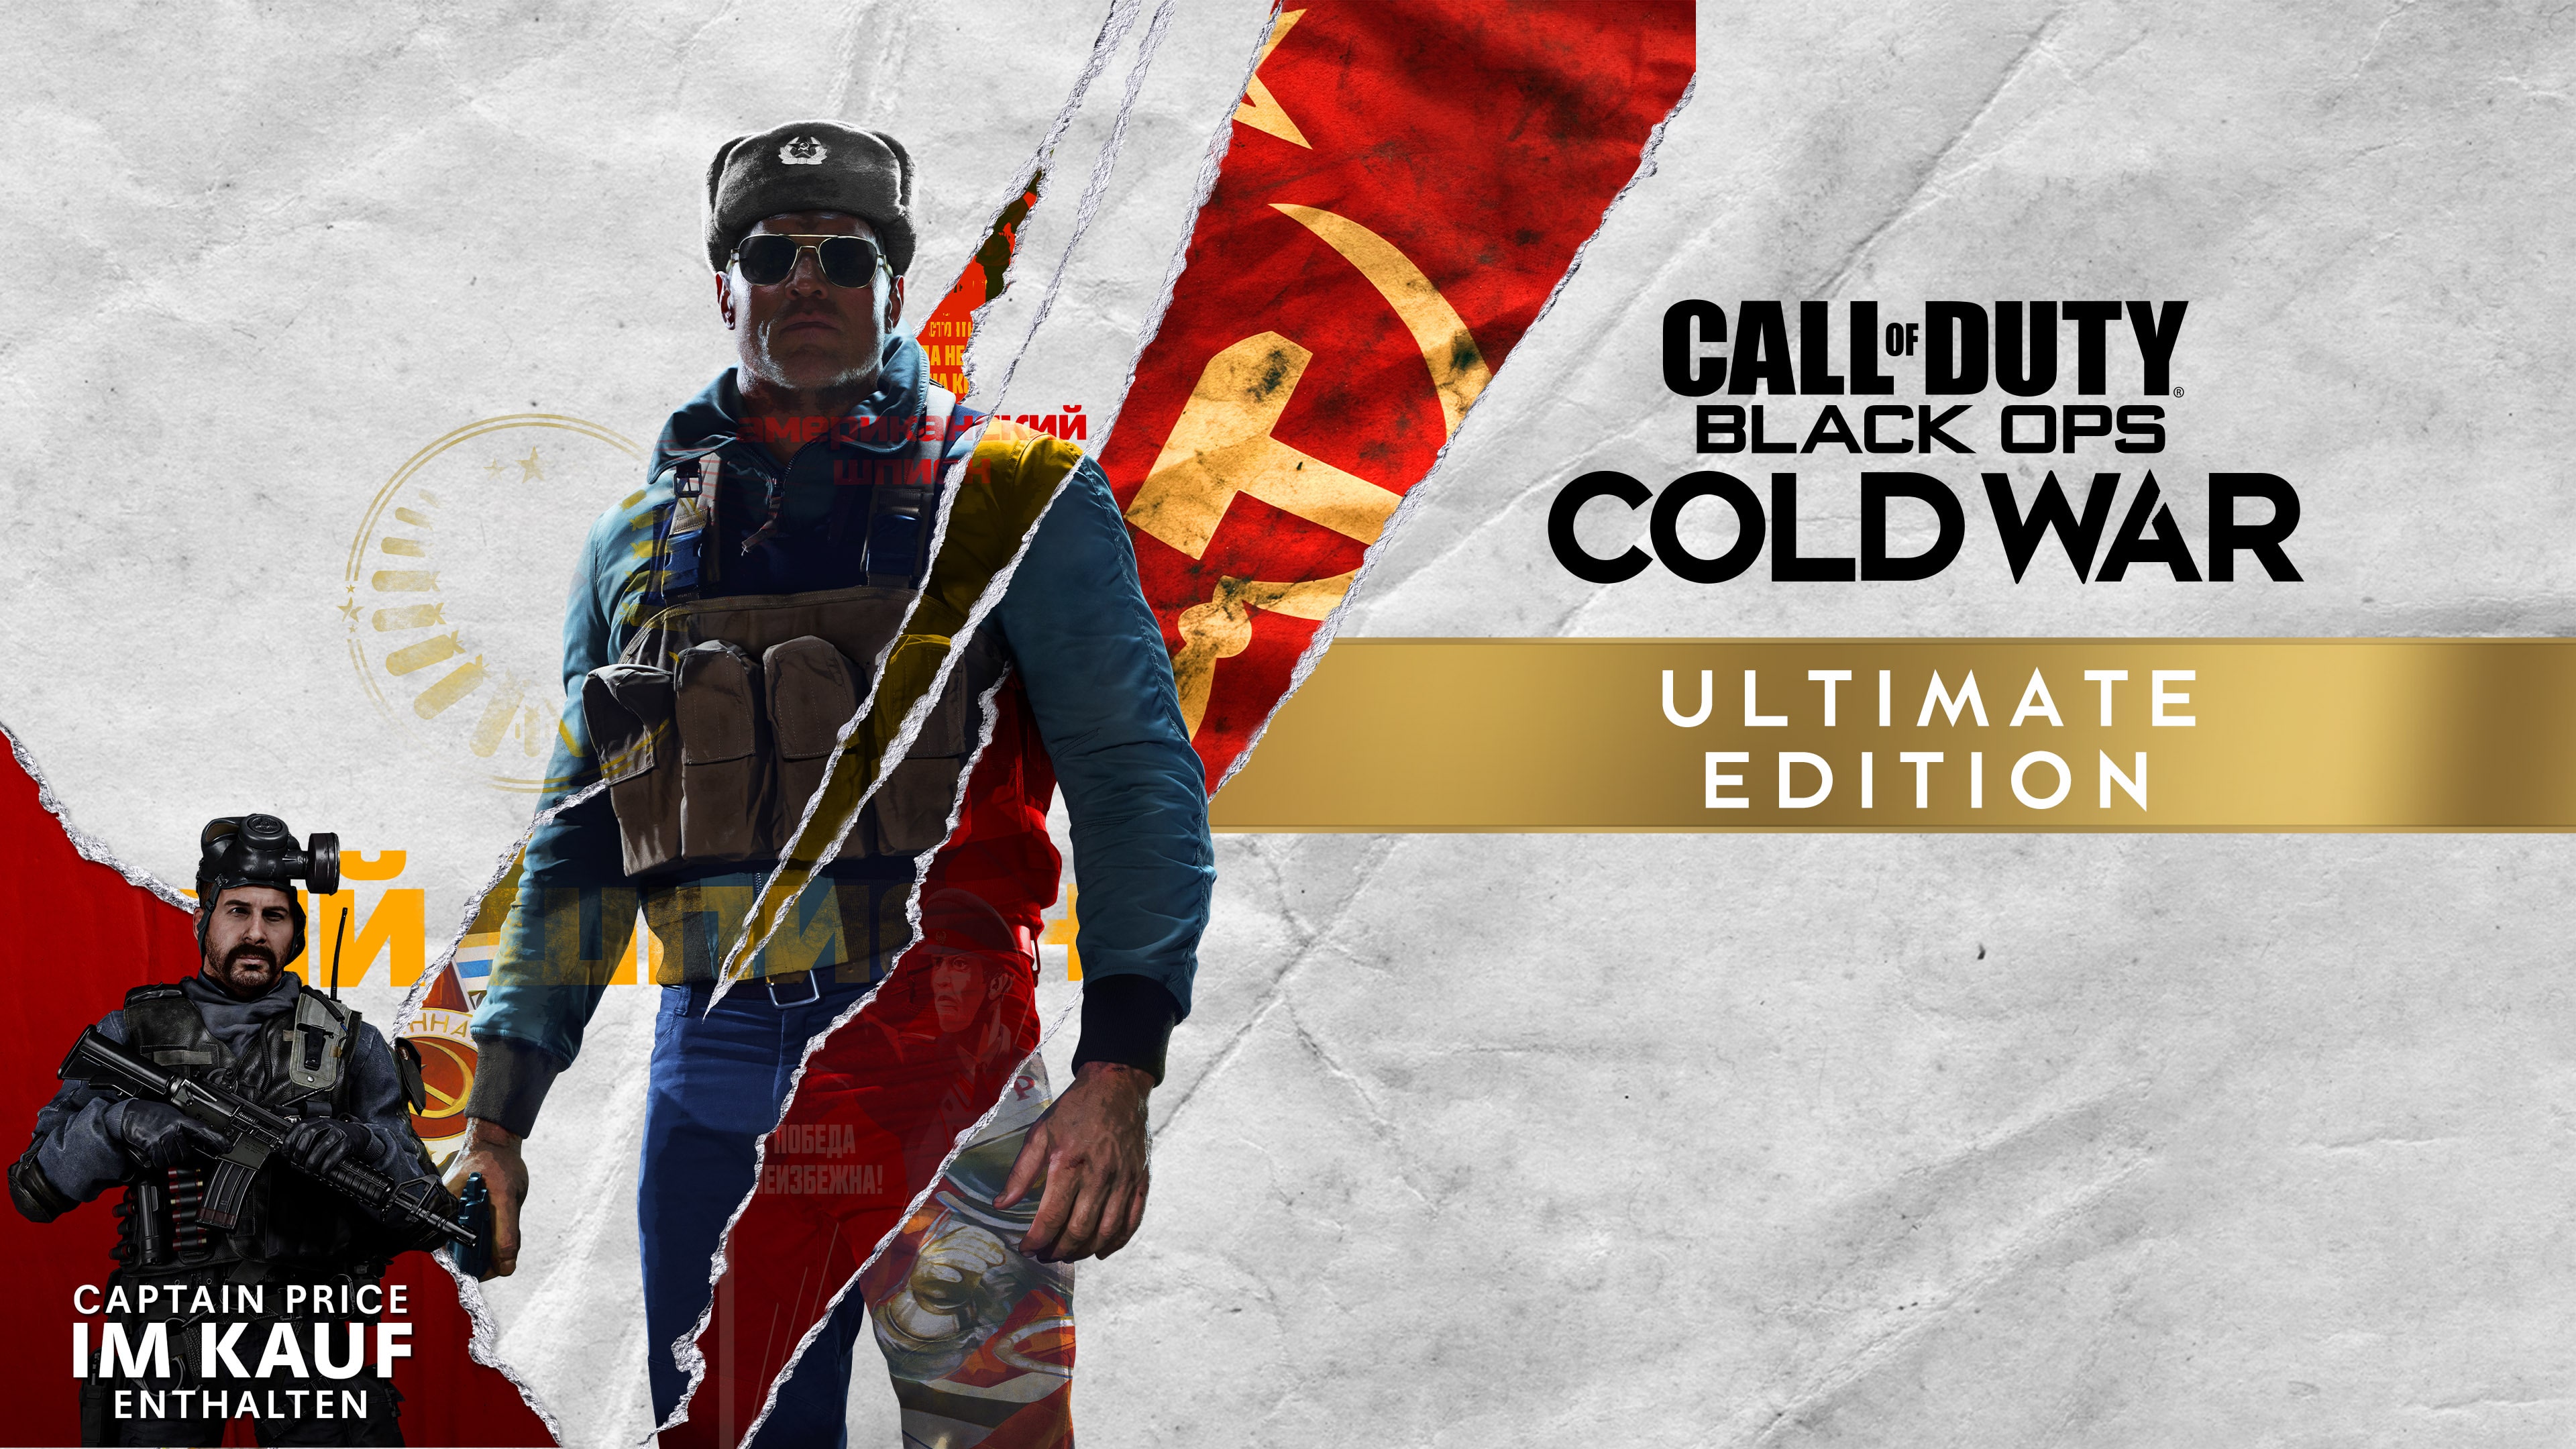 call of duty black ops cold war - ultimate edition pc